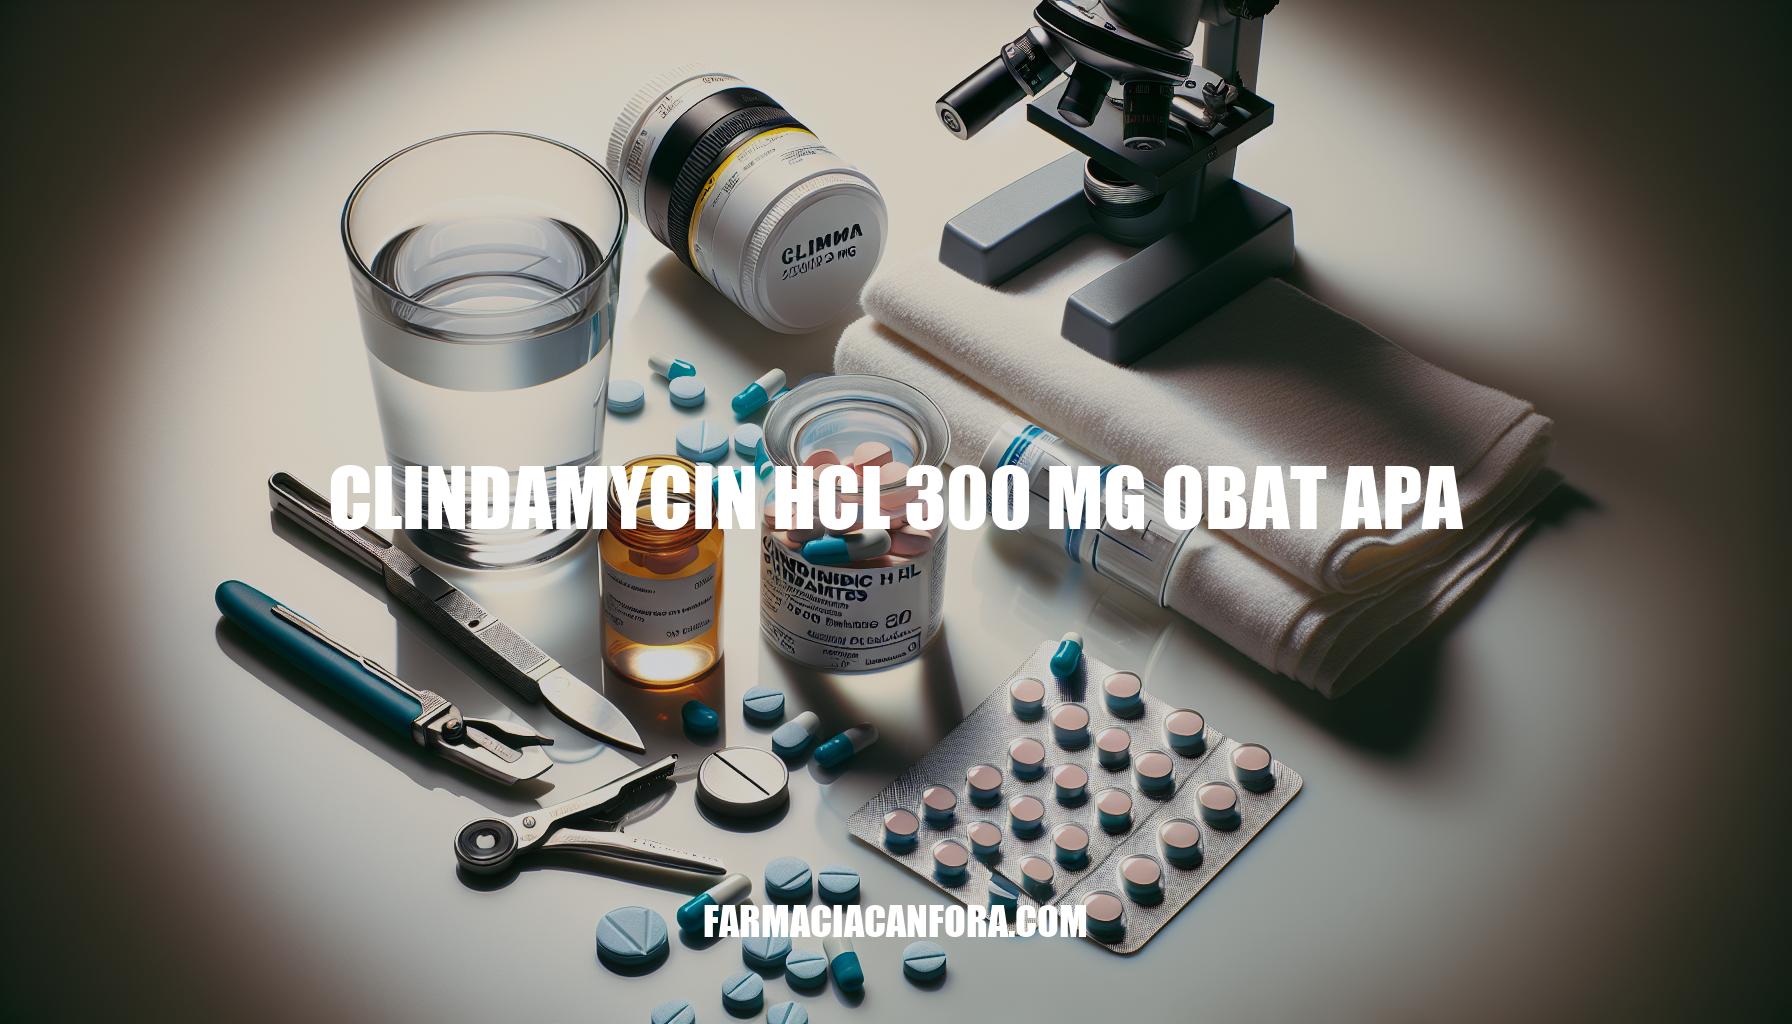 Clindamycin HCl 300 mg Obat Apa: Uses, Side Effects, Dosage, and More